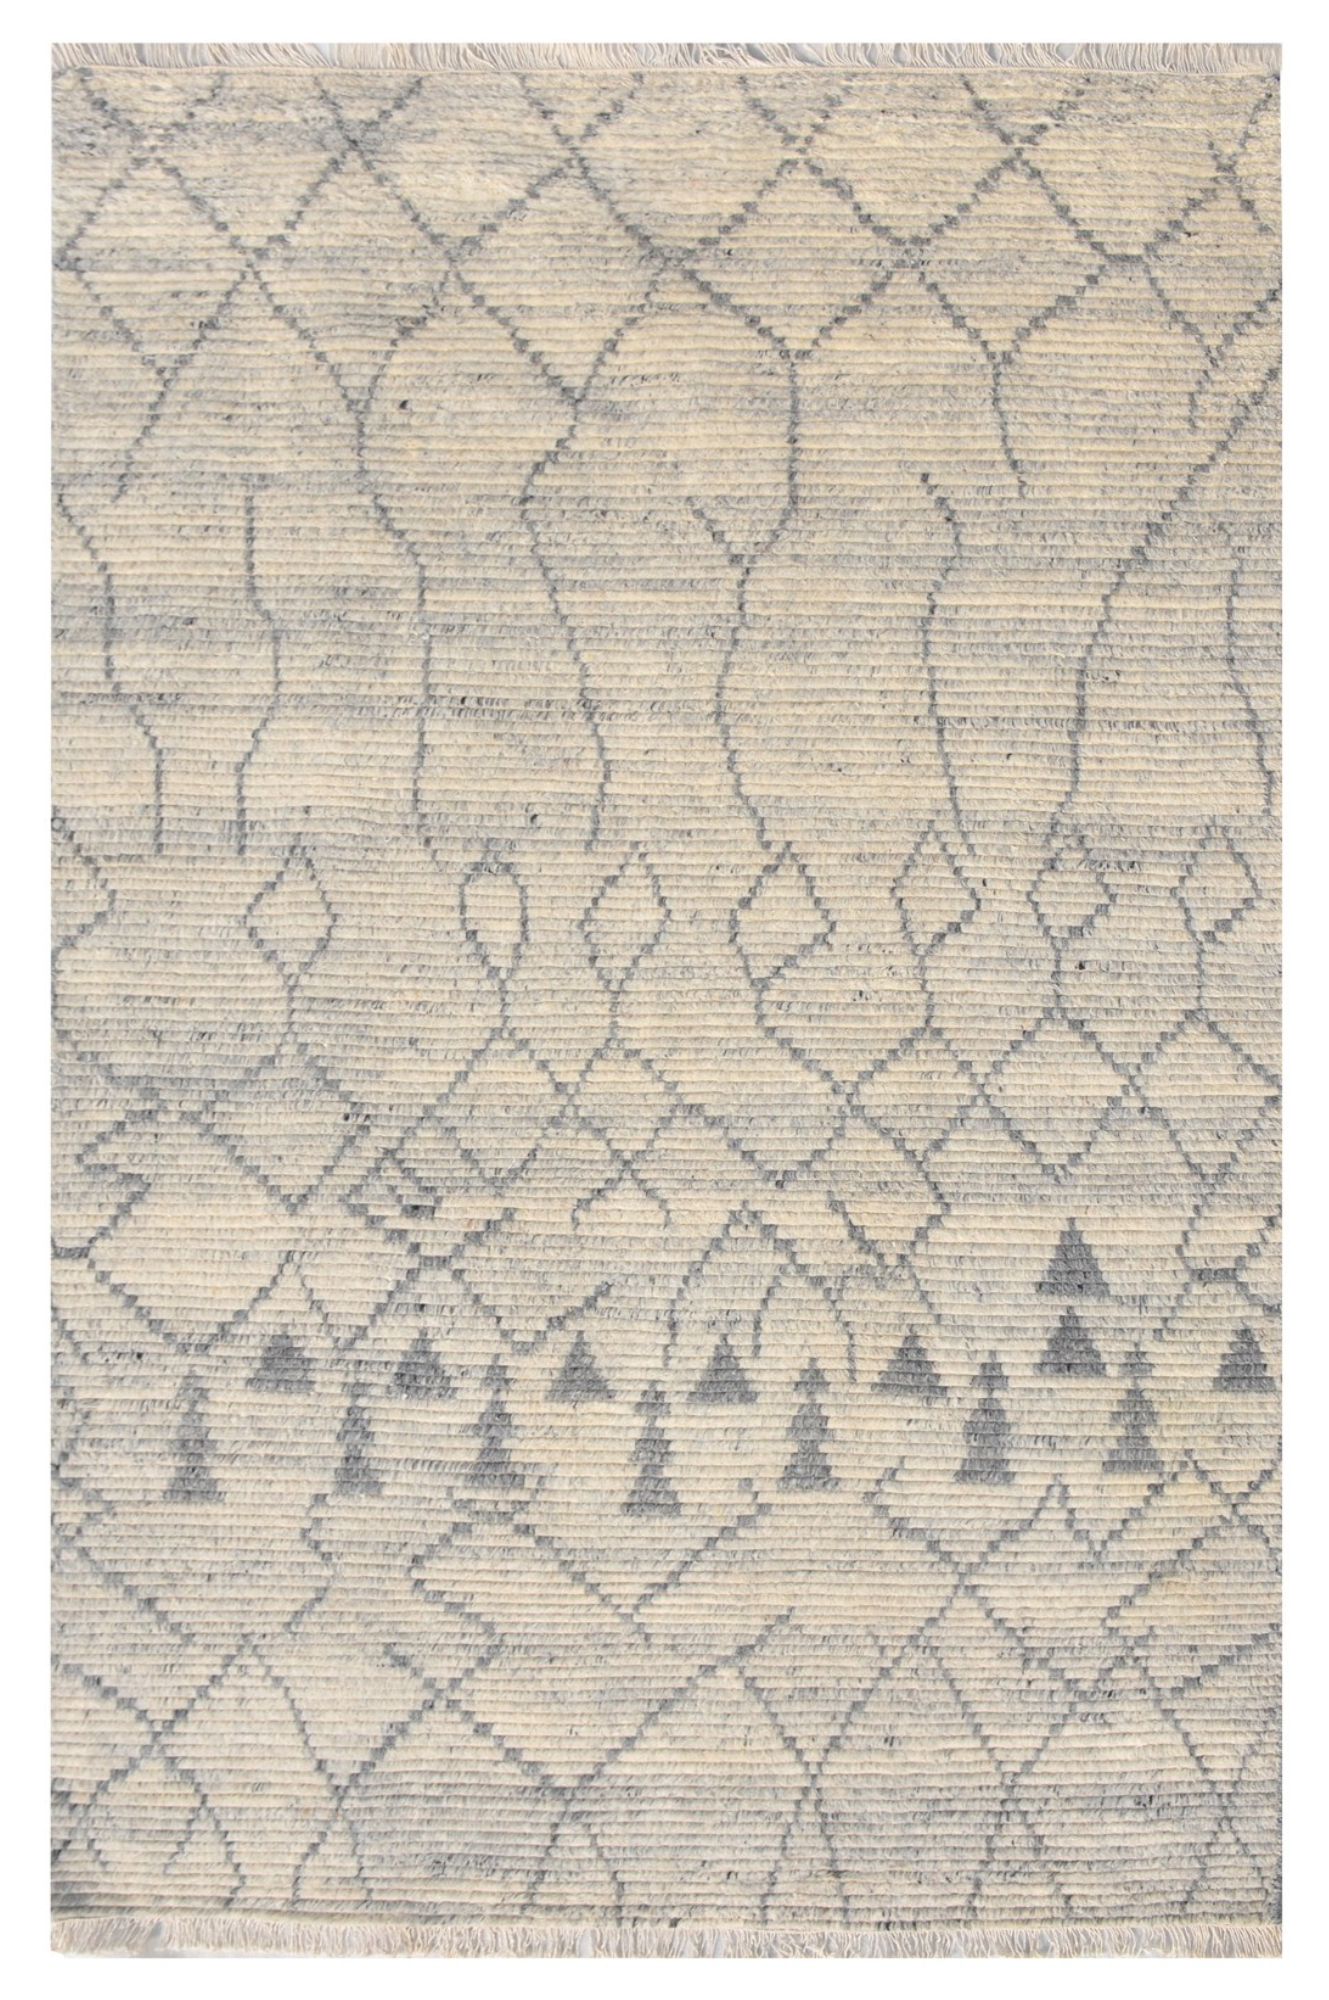 Rug # 31408, Hand knotted modern rug , 100% handspun wool pile, inspired by Morrocan berber designer rgs. Woven in noerthen India, size 240x160 cm (1) - Copy